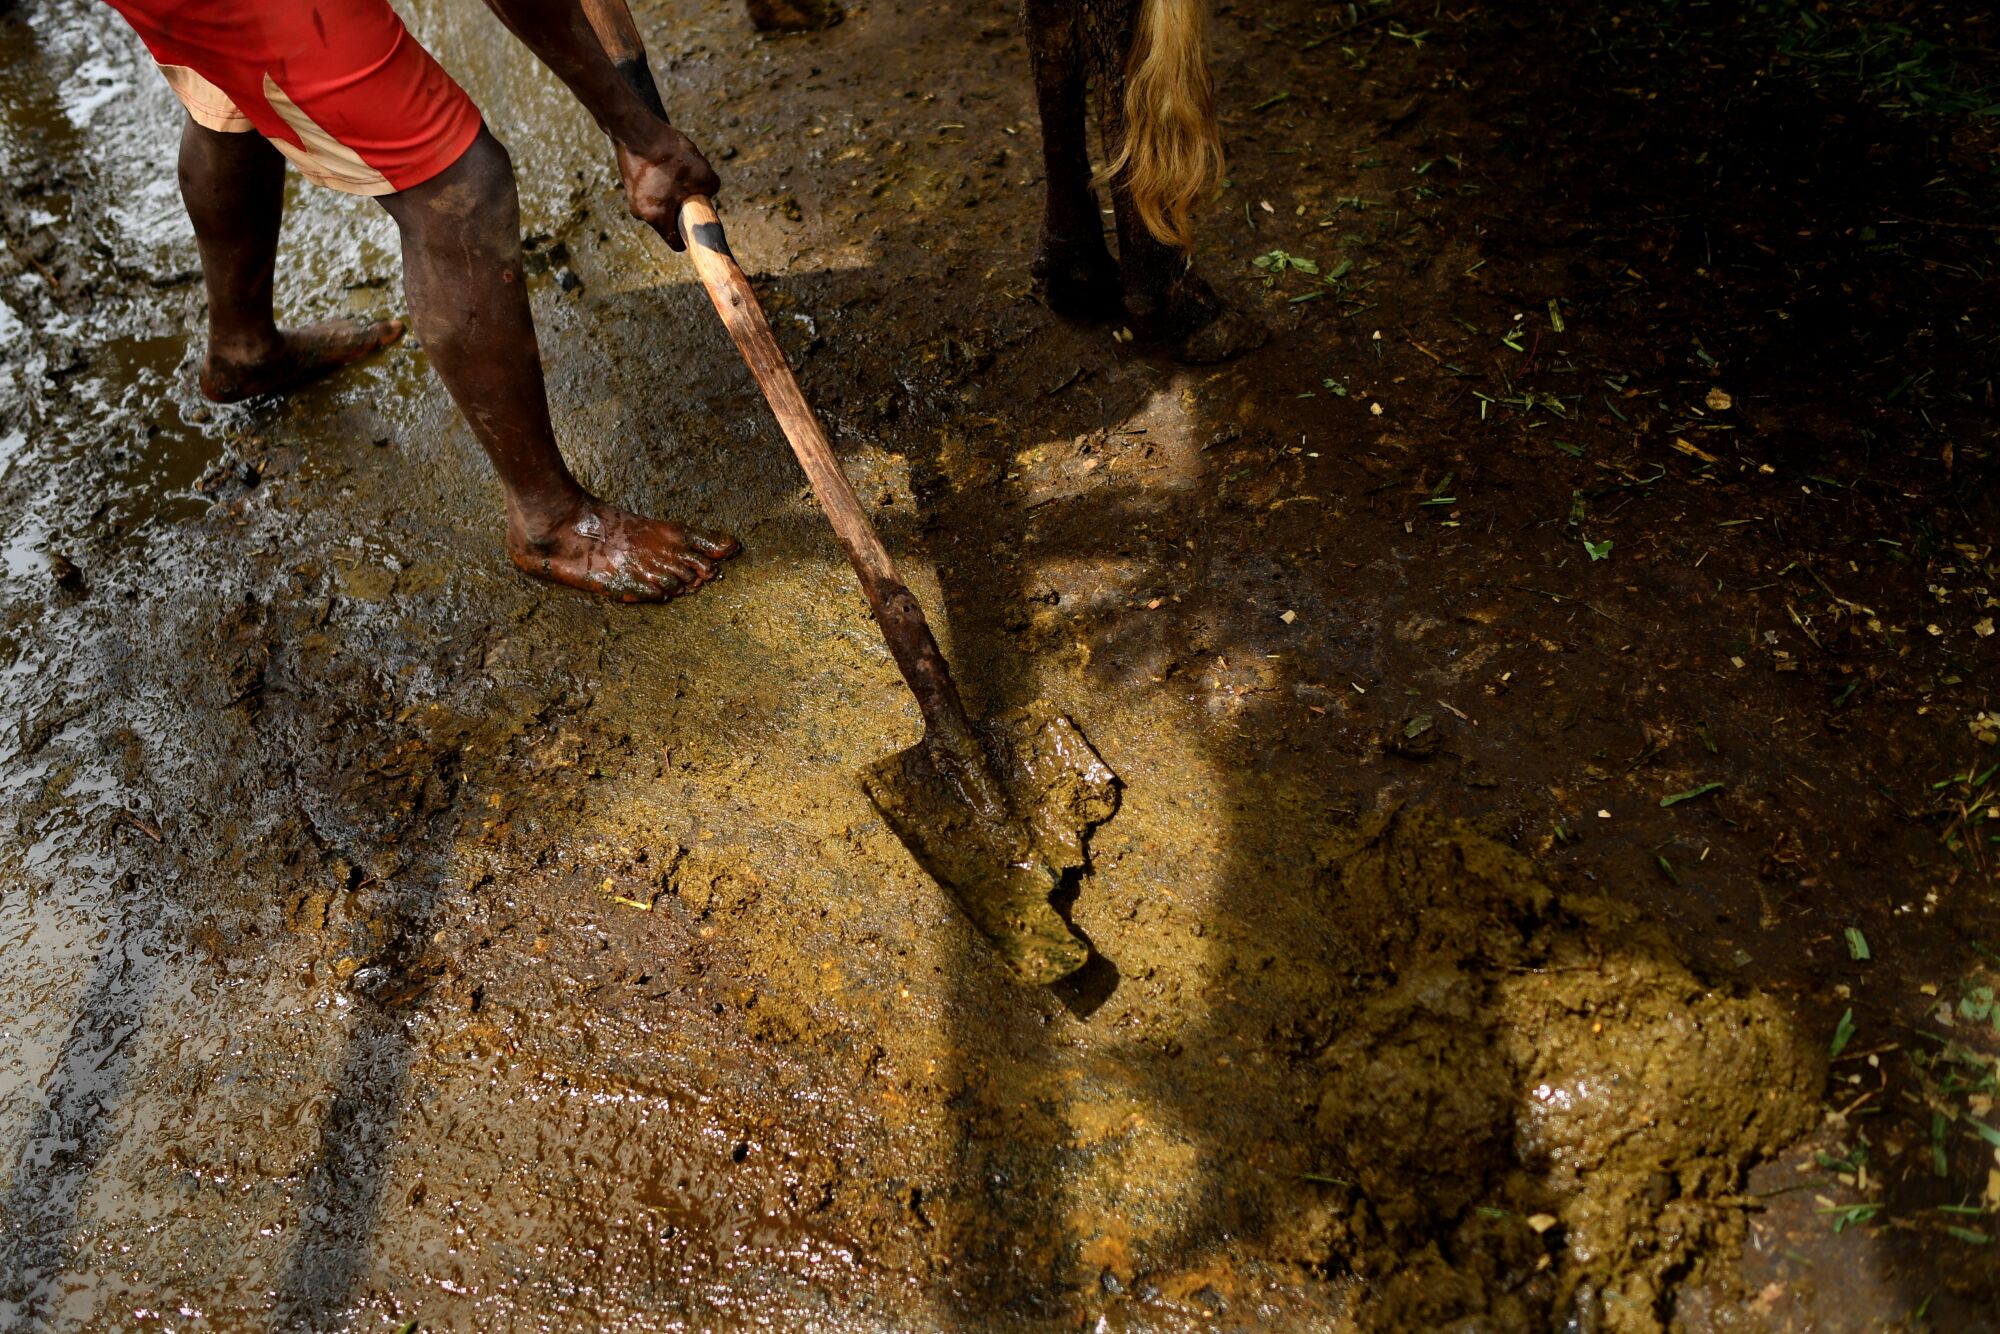 A barefoot Dennis Kazumba shovels cow manure to earn money to feed his grandmother and siblings.